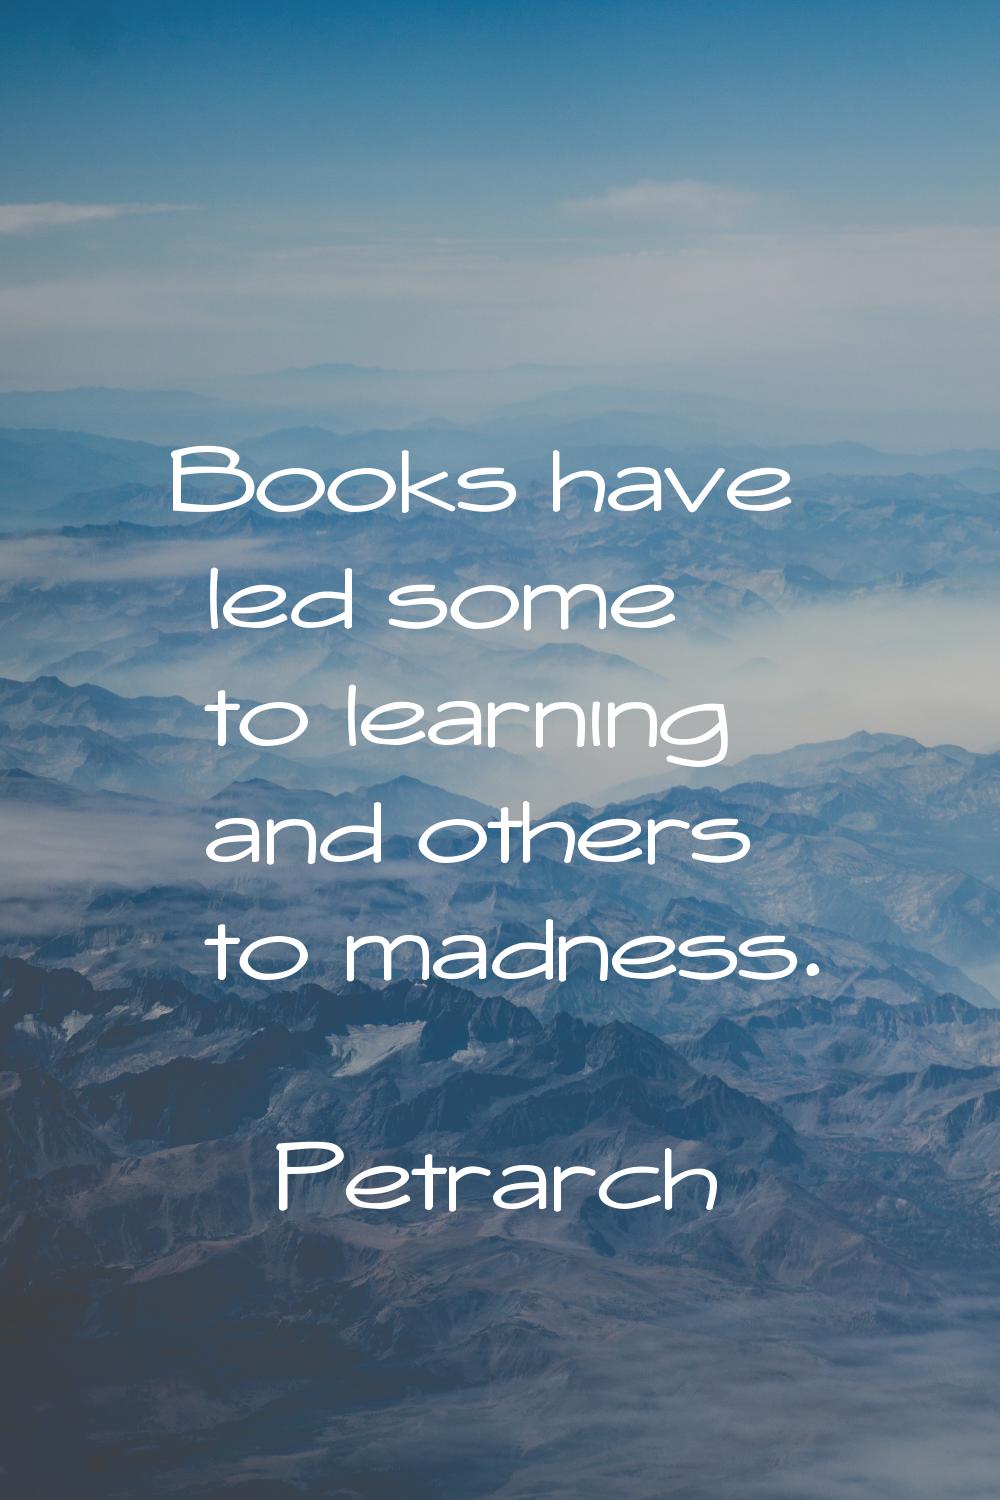 Books have led some to learning and others to madness.